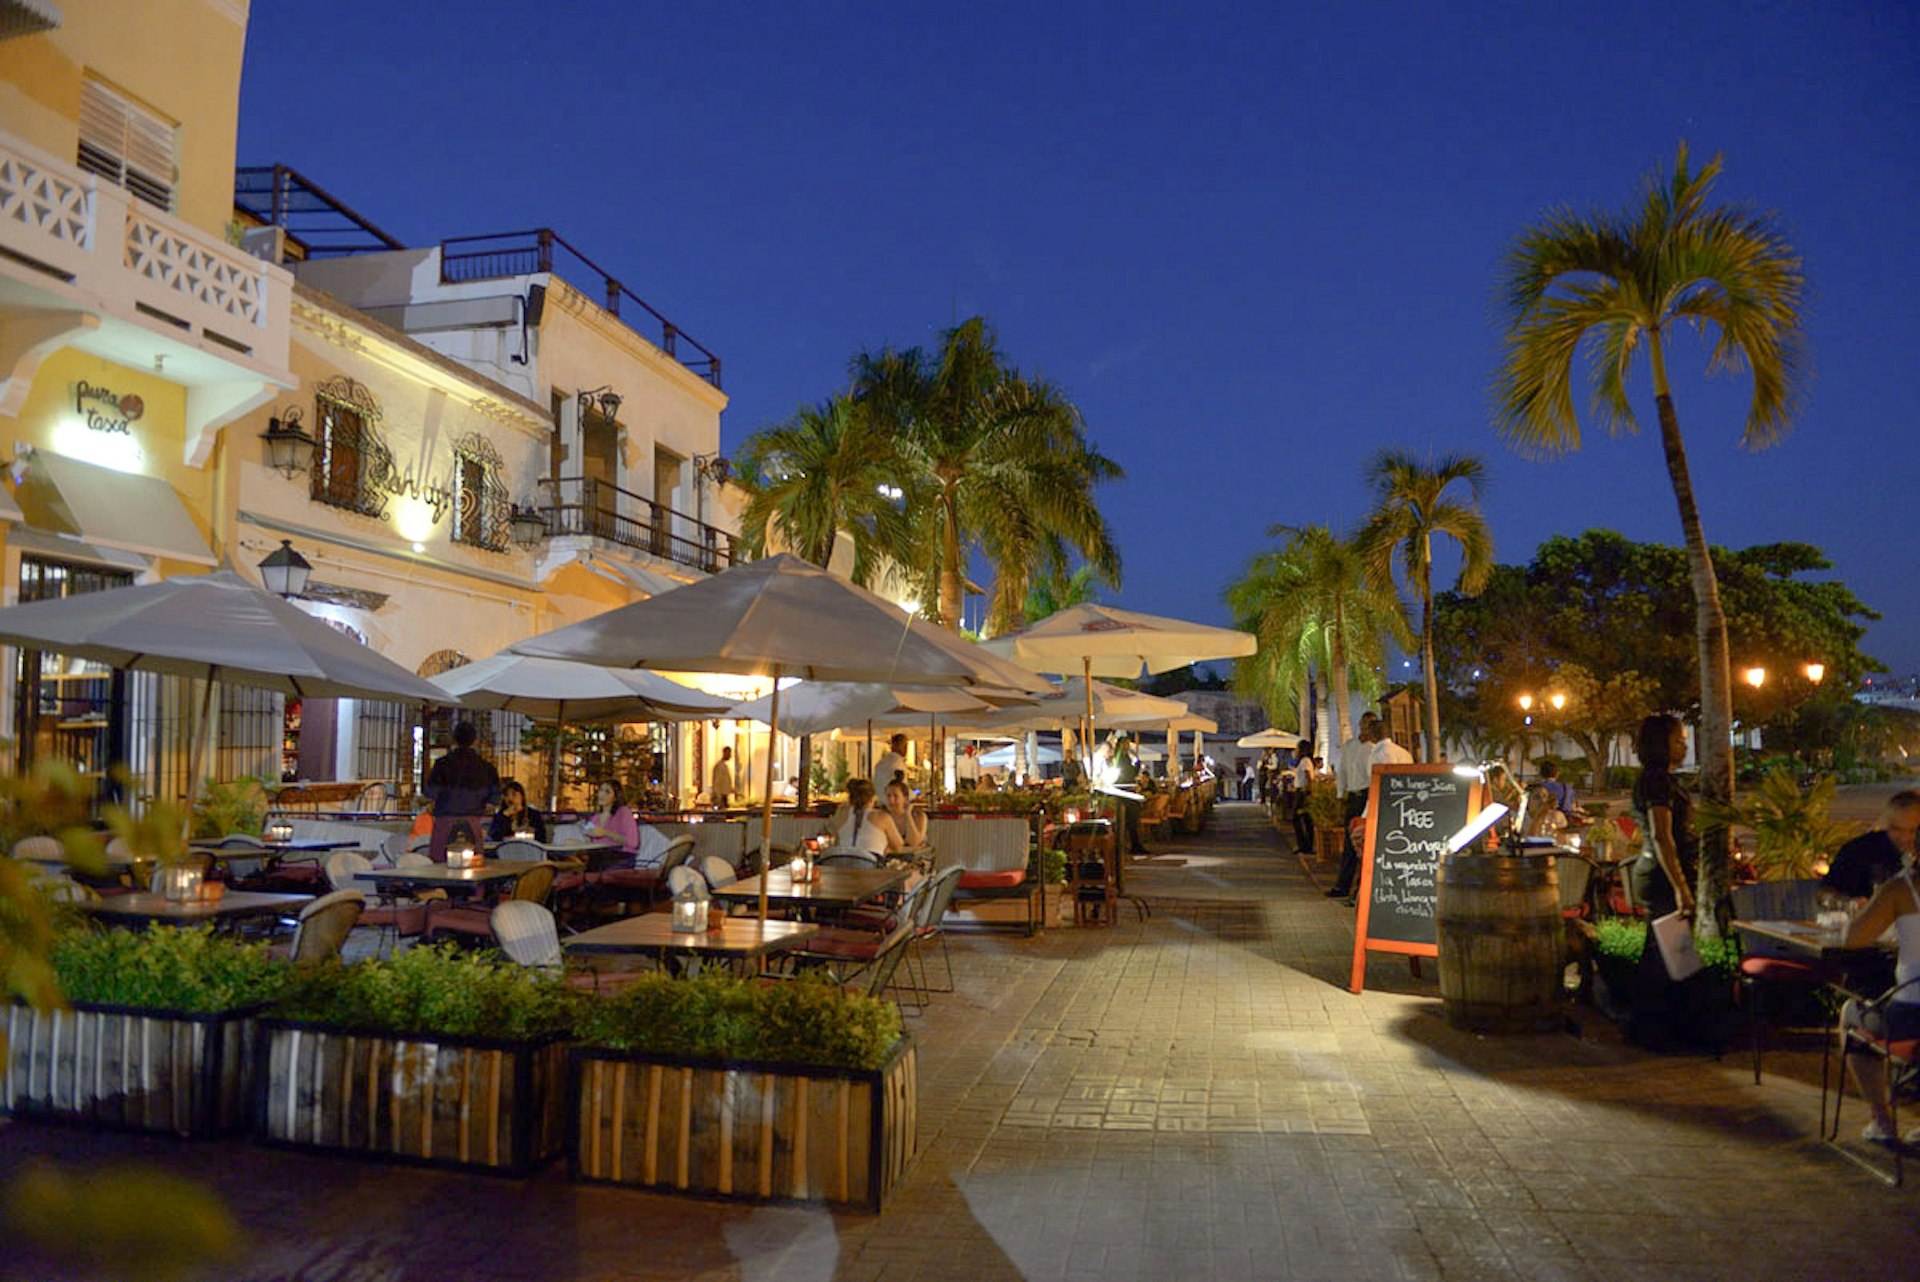 A range of romantic bistros line Plaza Espana, ideal for a first-time dinner in Santo Domingo © Lebawit Girma / Lonely Planet